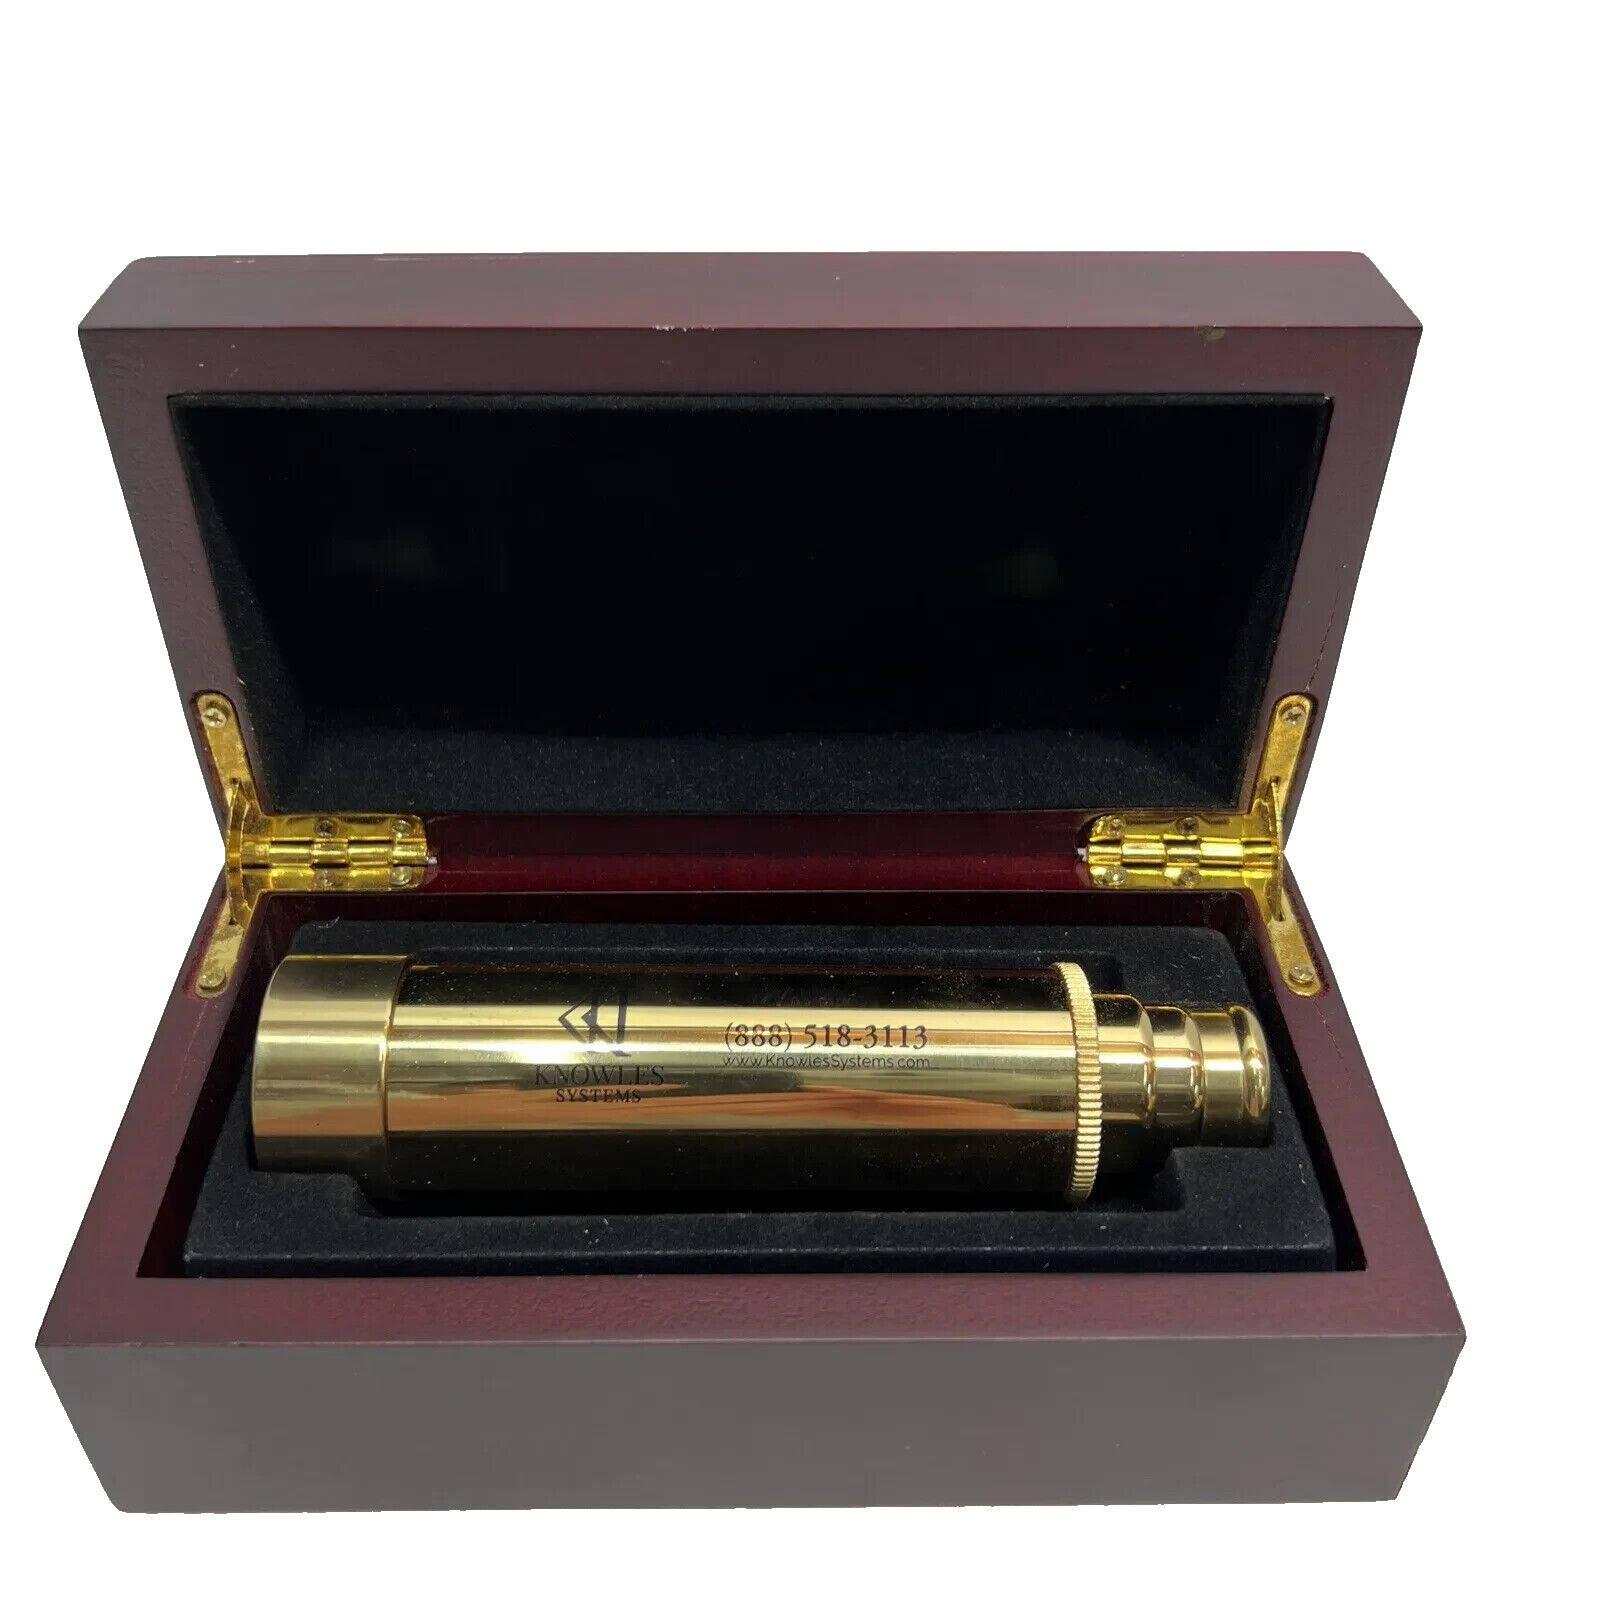 AdVantage Line Promotional Solid Brass Telescope With Rosewood Case ~ New